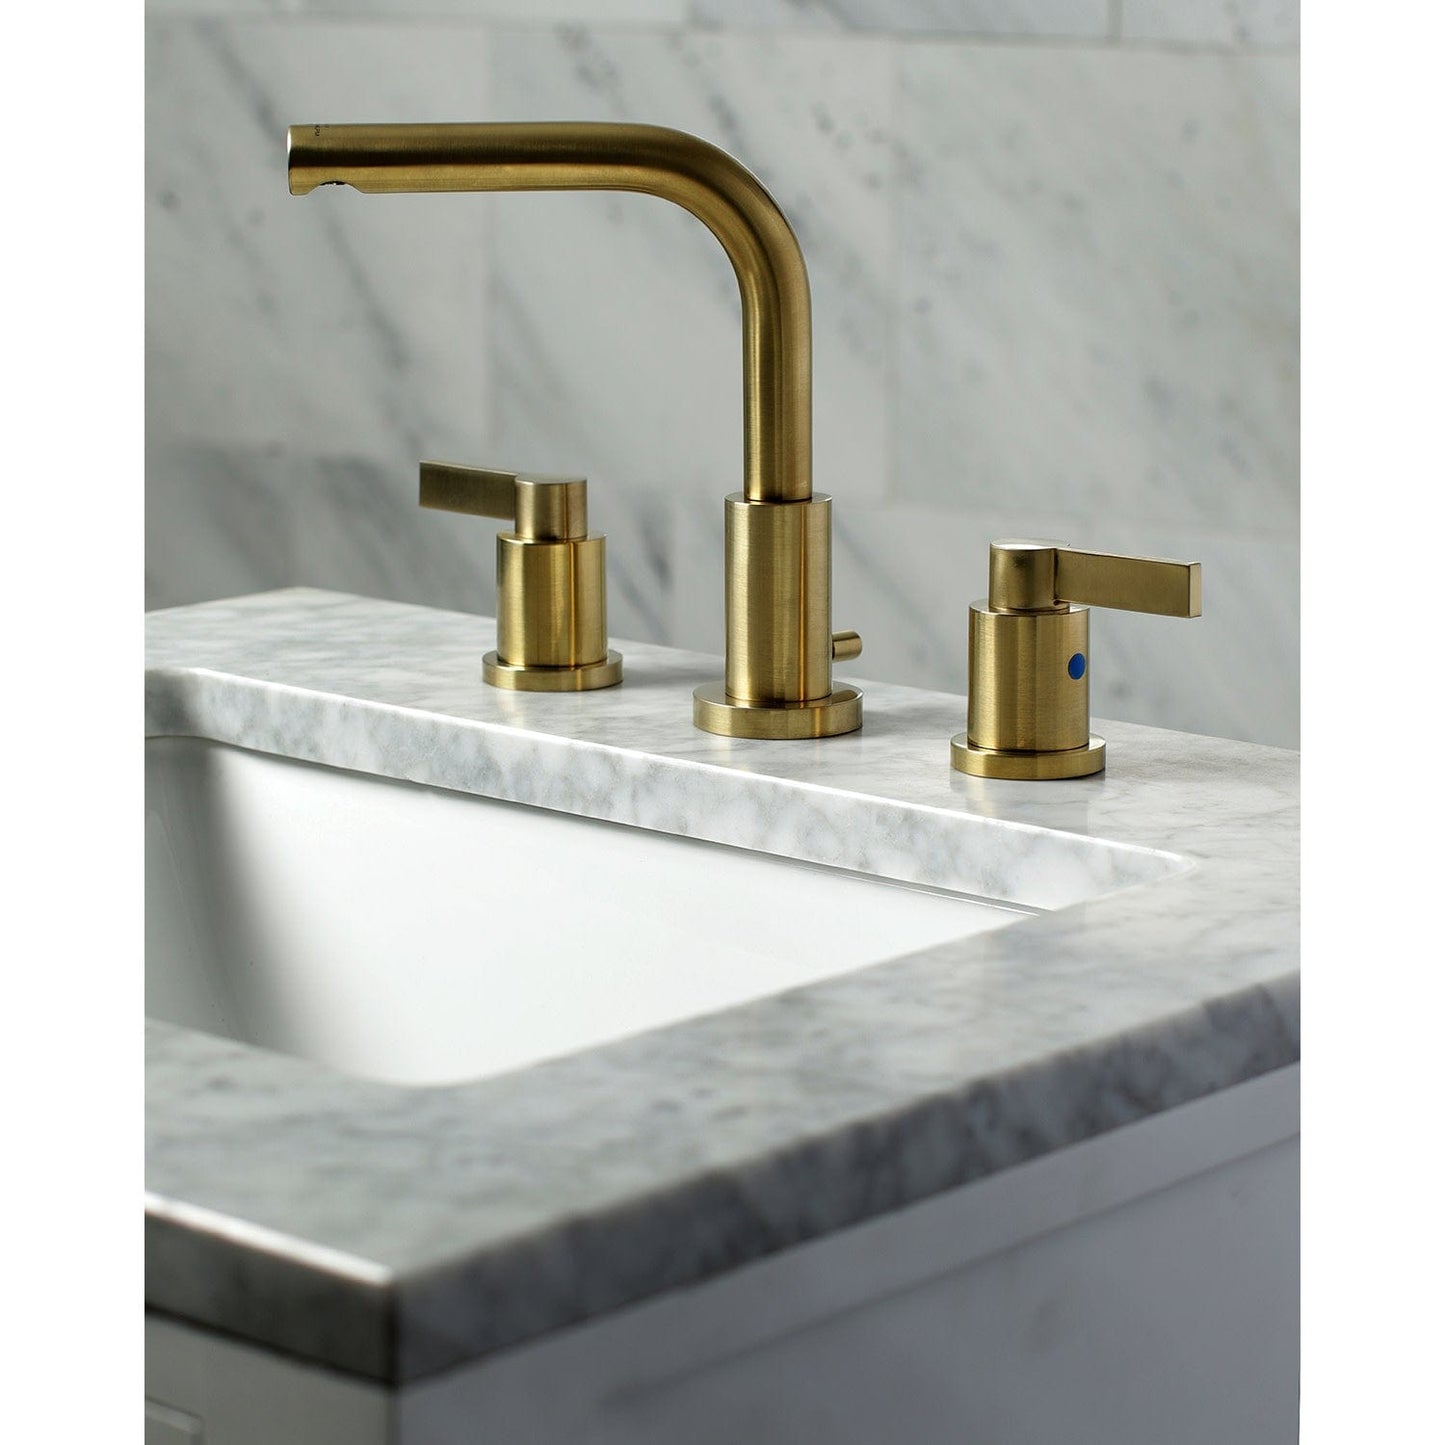 KINGSTON Brass Fauceture Widespread Bathroom Faucet - Brushed Brass